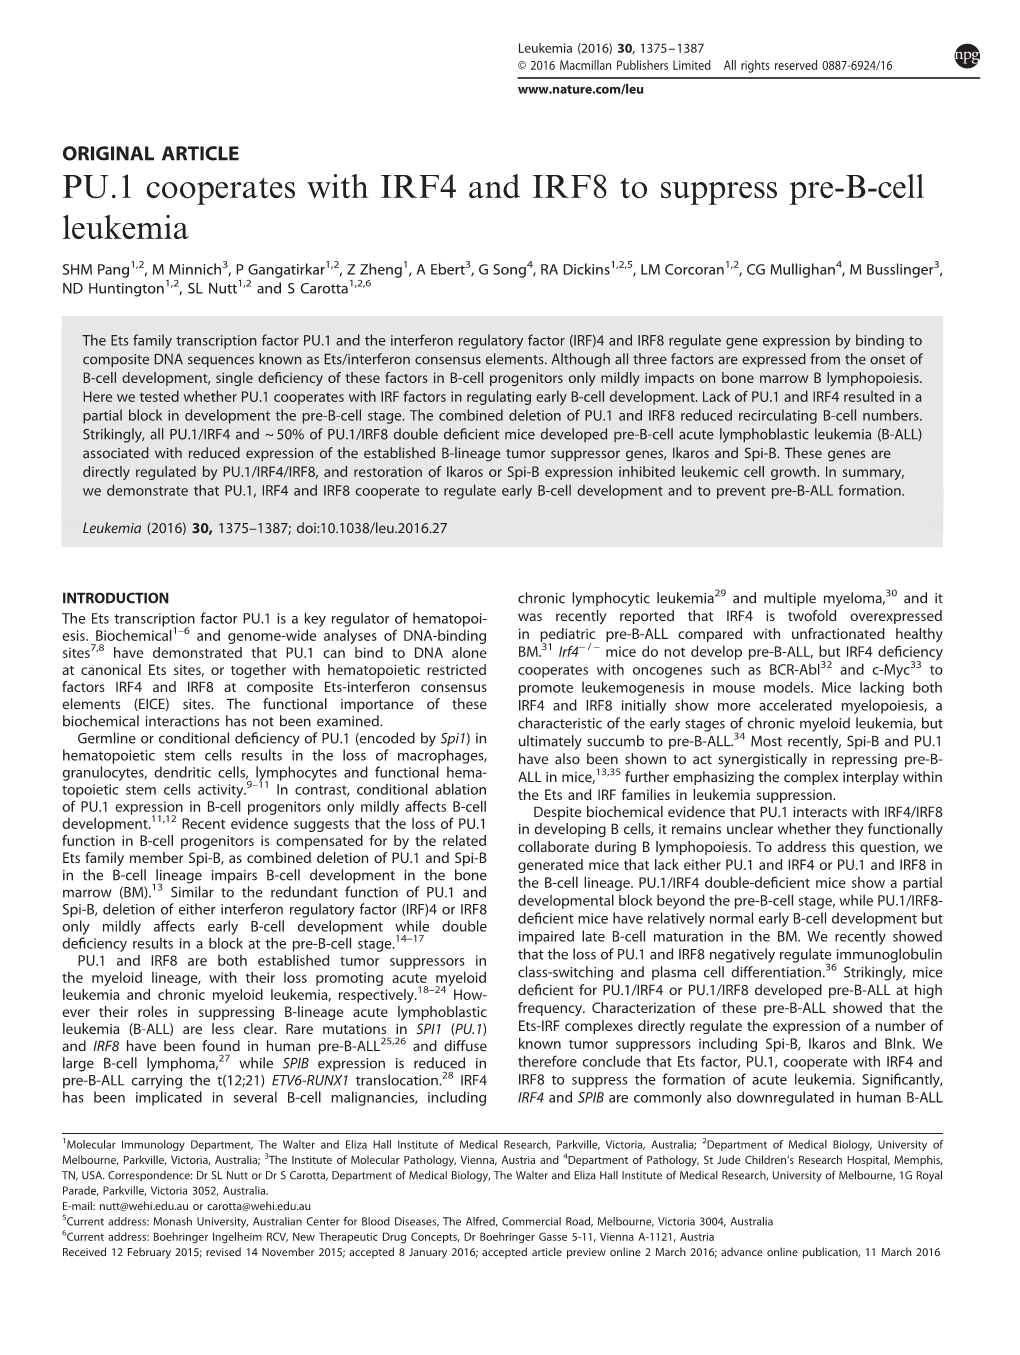 PU.1 Cooperates with IRF4 and IRF8 to Suppress Pre-B-Cell Leukemia